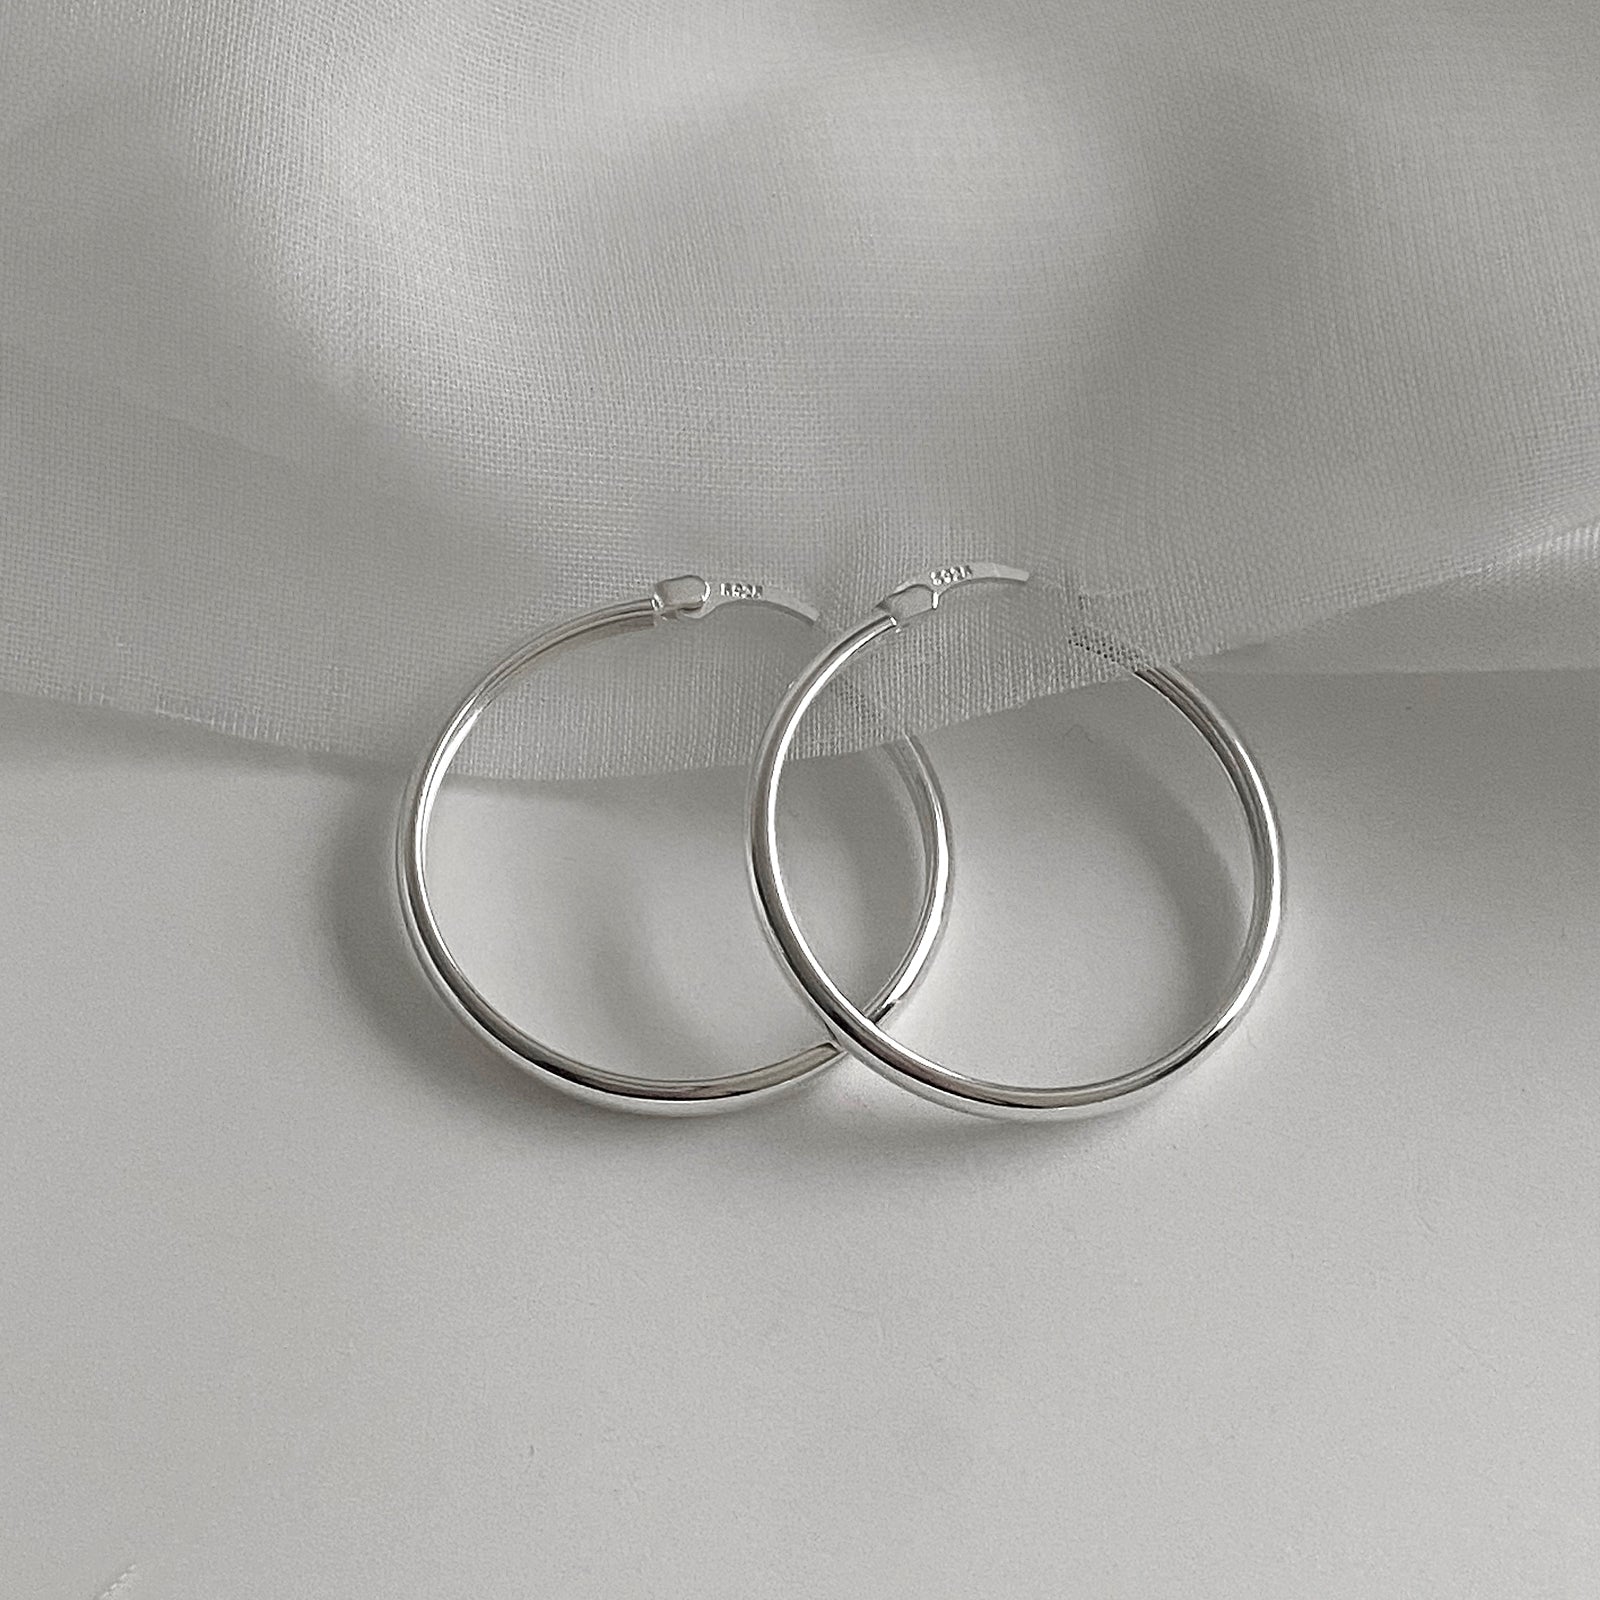 Top View of Jane Hoops size 30mm. These are classic hoop earrings with a latch back for closure. Has a S925 stamp on the latch. These hoop earrings are made of 925 Sterling Silver and has a smooth and shiny finish.